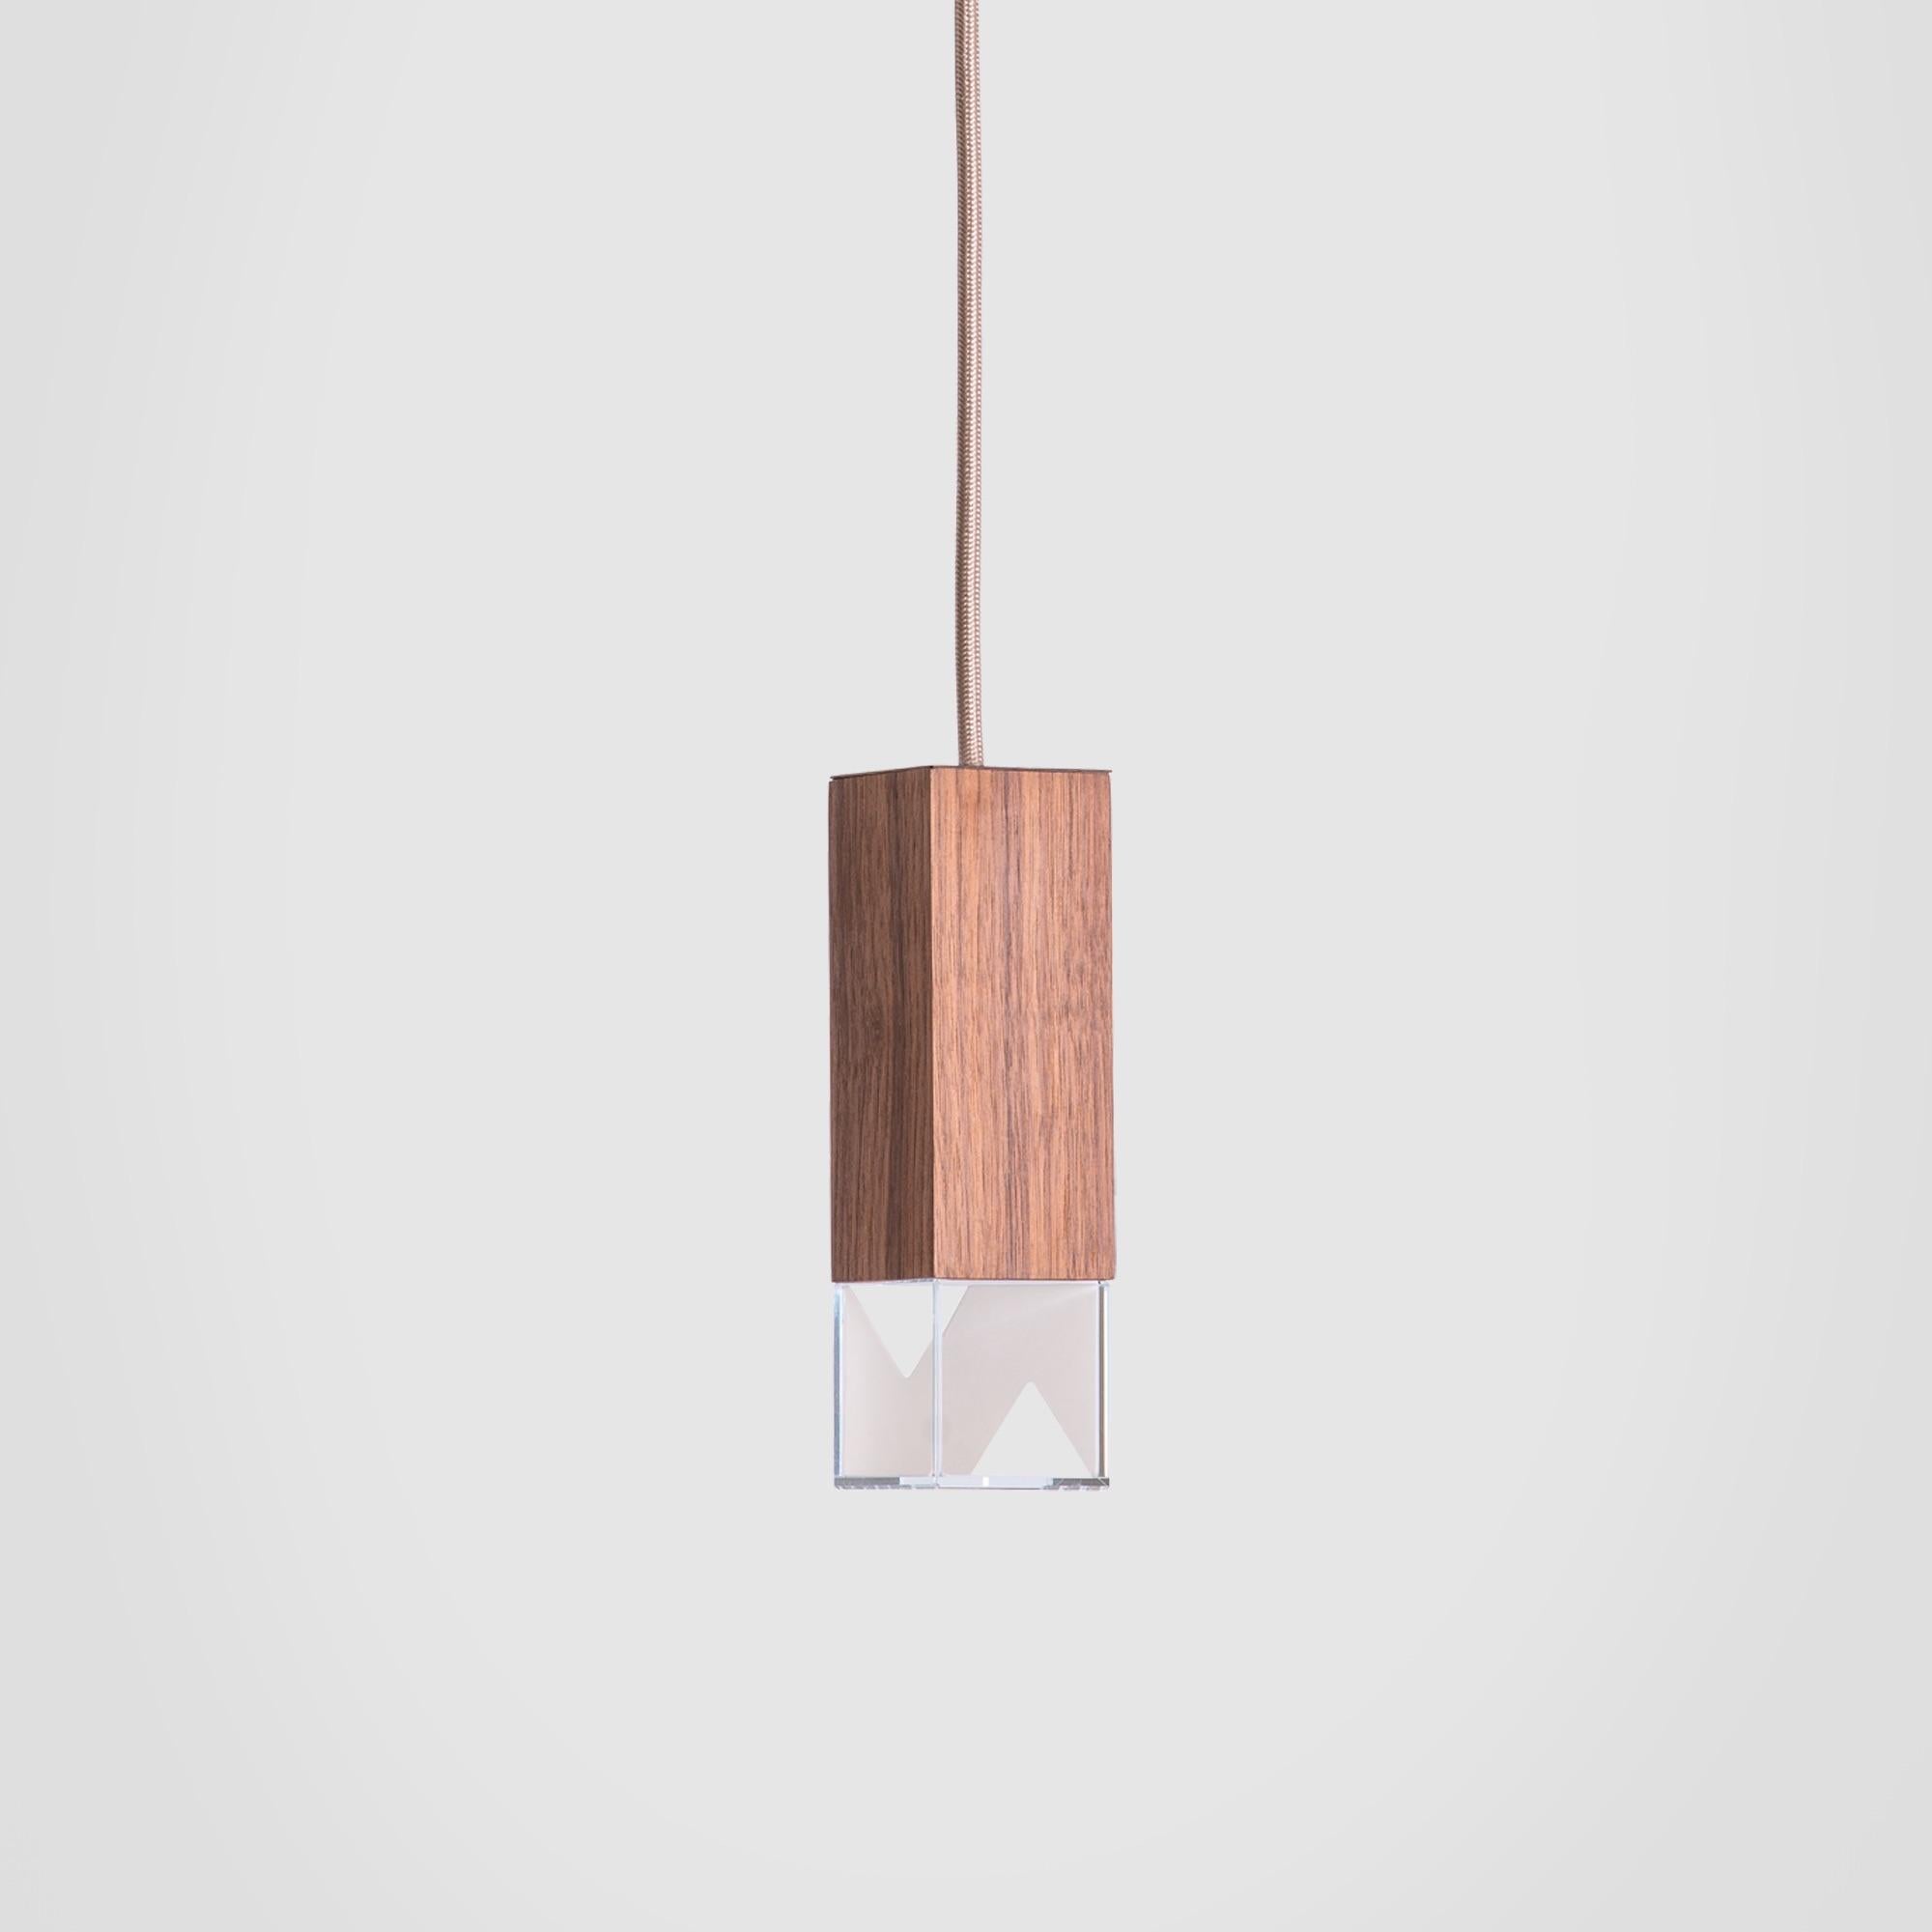 About
Walnut Wood Pendant Lamp Single Suspension by Formaminima

Lamp/One Wood from Single Suspensions Series
Design by Formaminima
Single Pendant
Materials:
Body lamp handcrafted in solid Canaletto walnut wood / crystal glass diffuser hosting